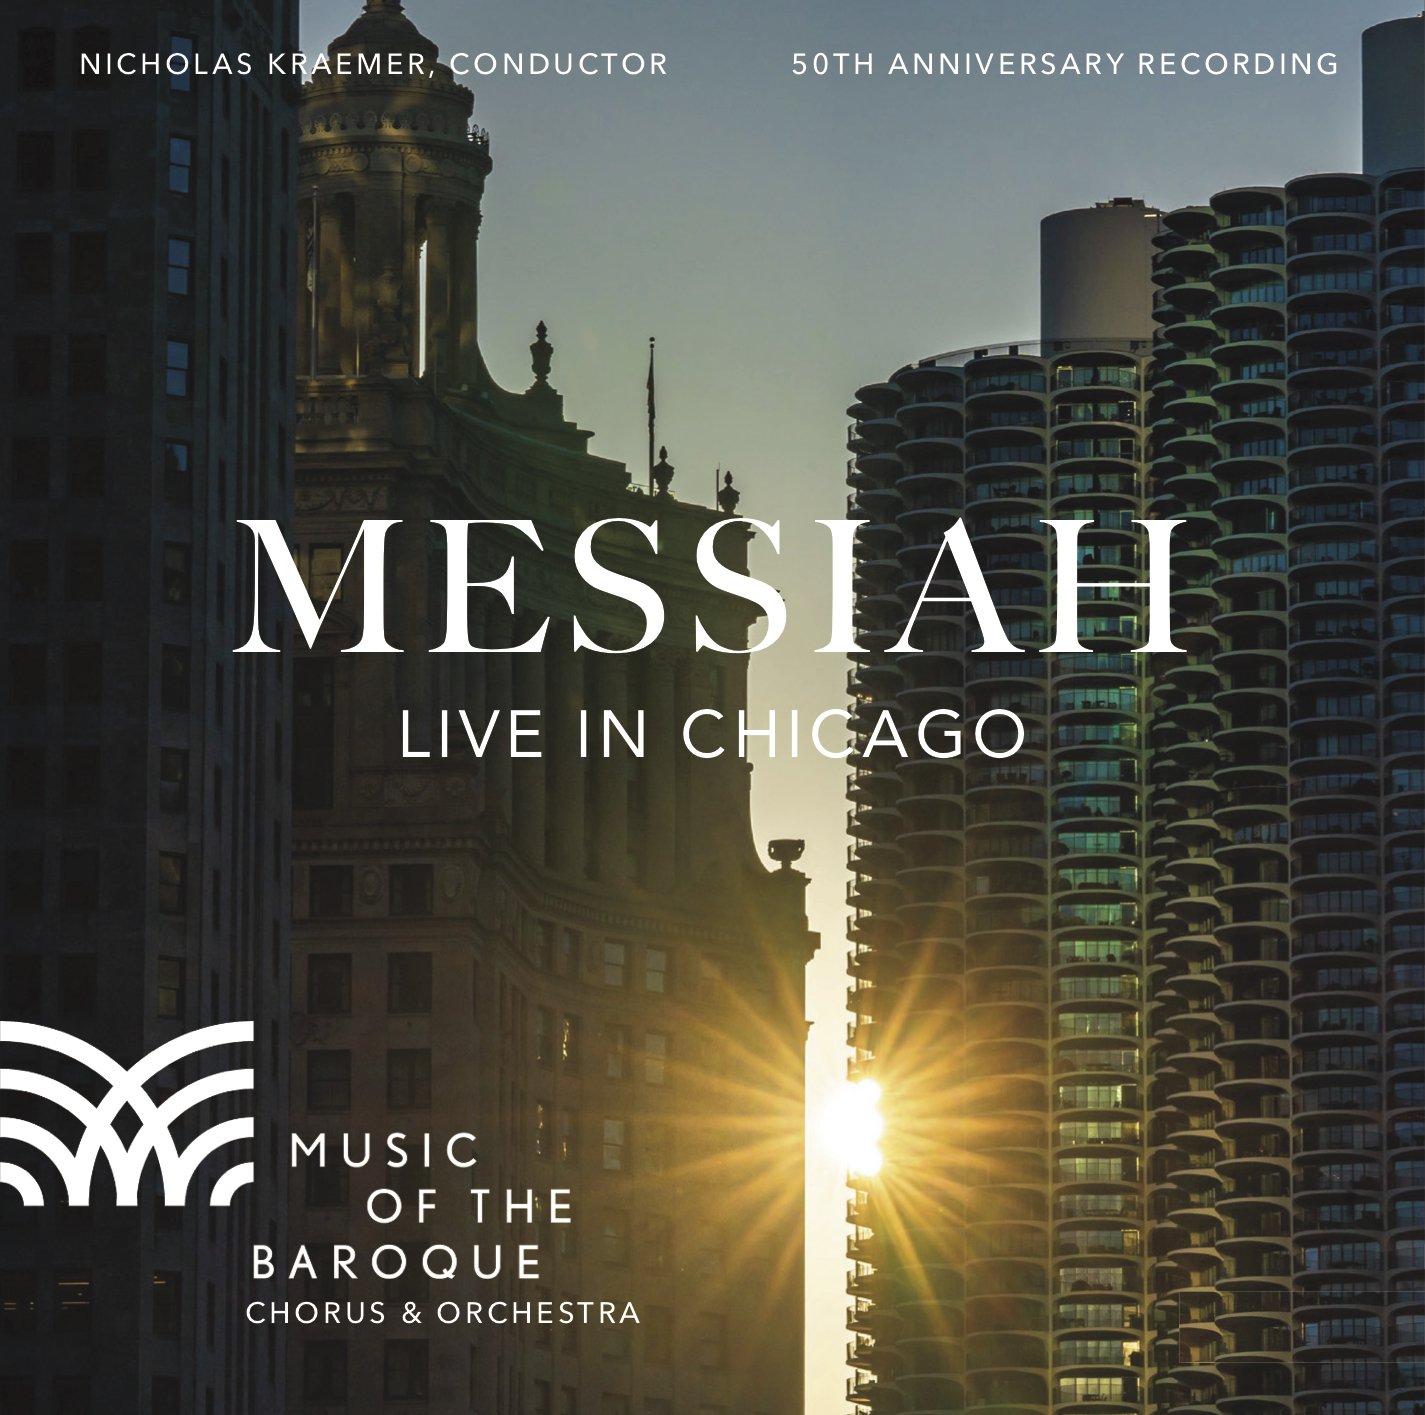  Music of the Baroque releases its recording of Handel’s Messiah with my image on the cover. 